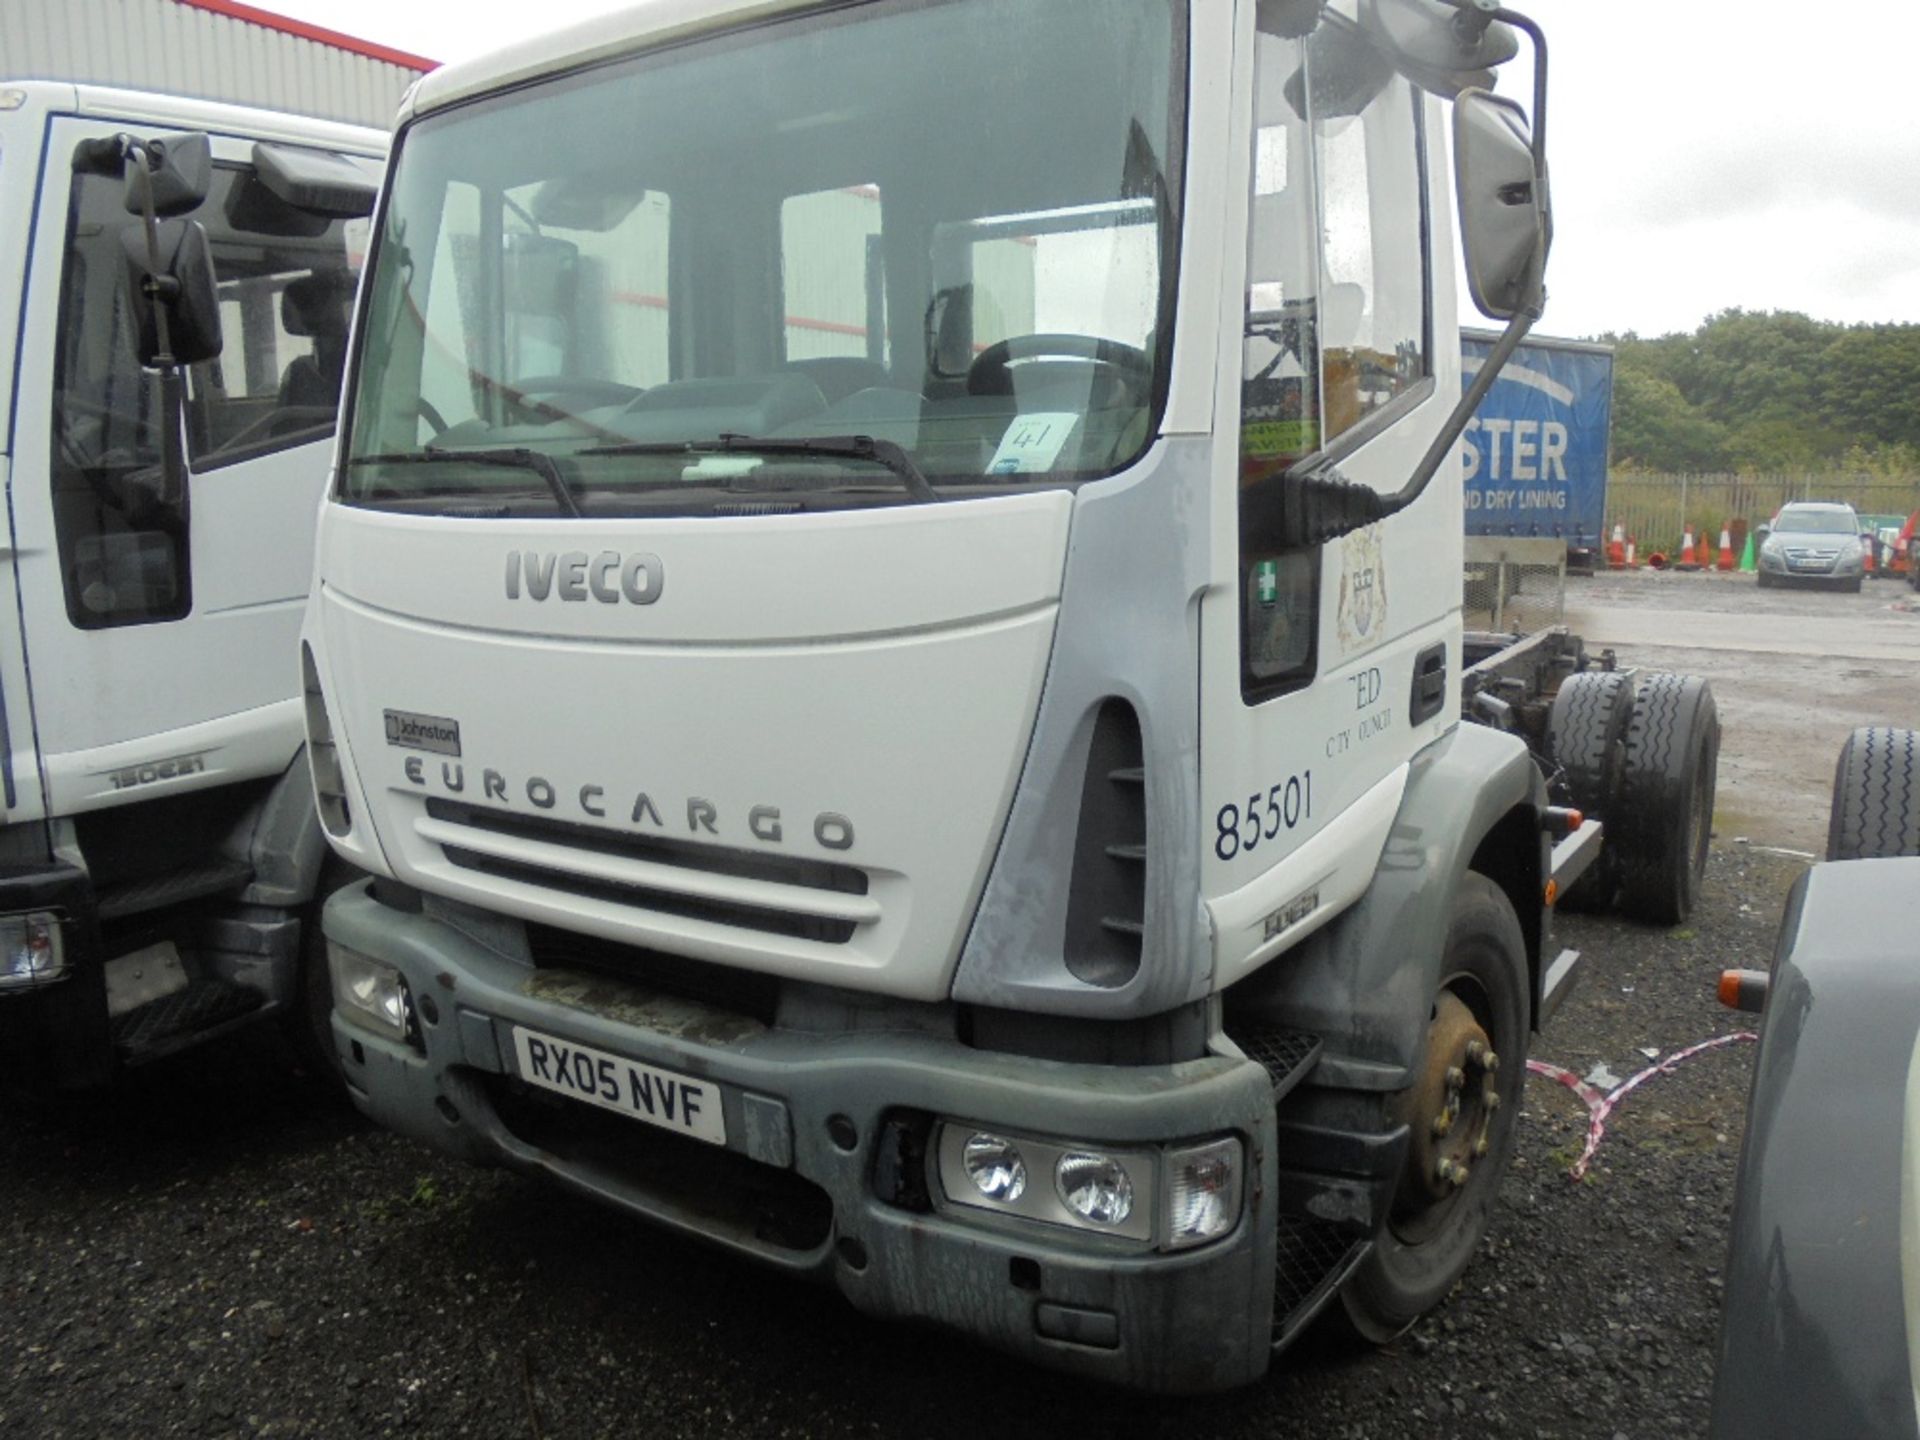 Iveco 150E21 Dual Steer Chassis Cab, Registration No. RX05 NVF, First Registered: 04/04/05, 185599Km